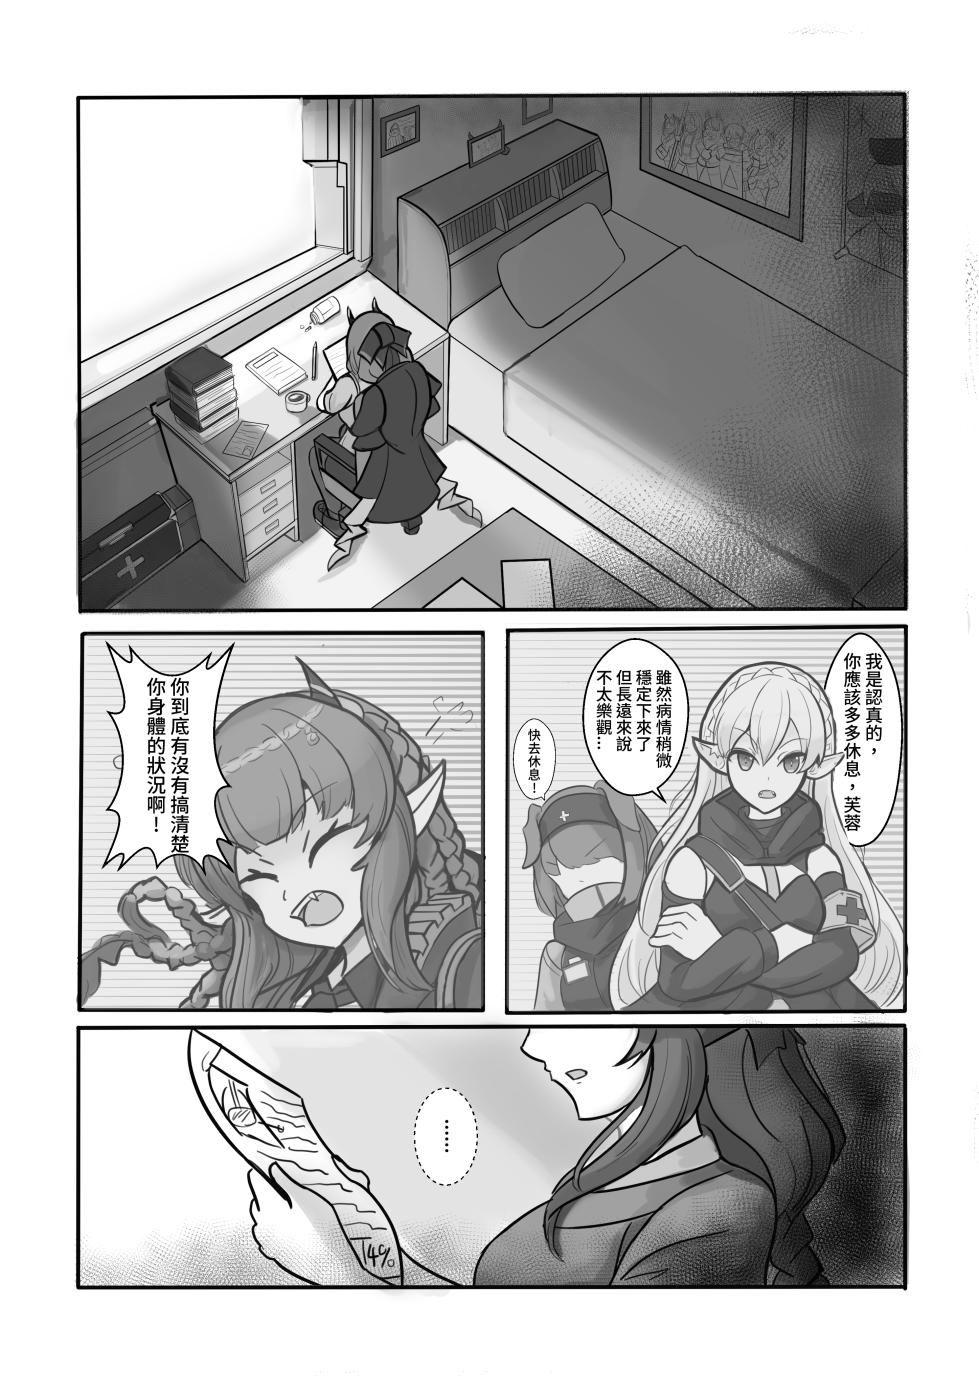 Afterglow-夕照之後 (Arknights) - Page 7